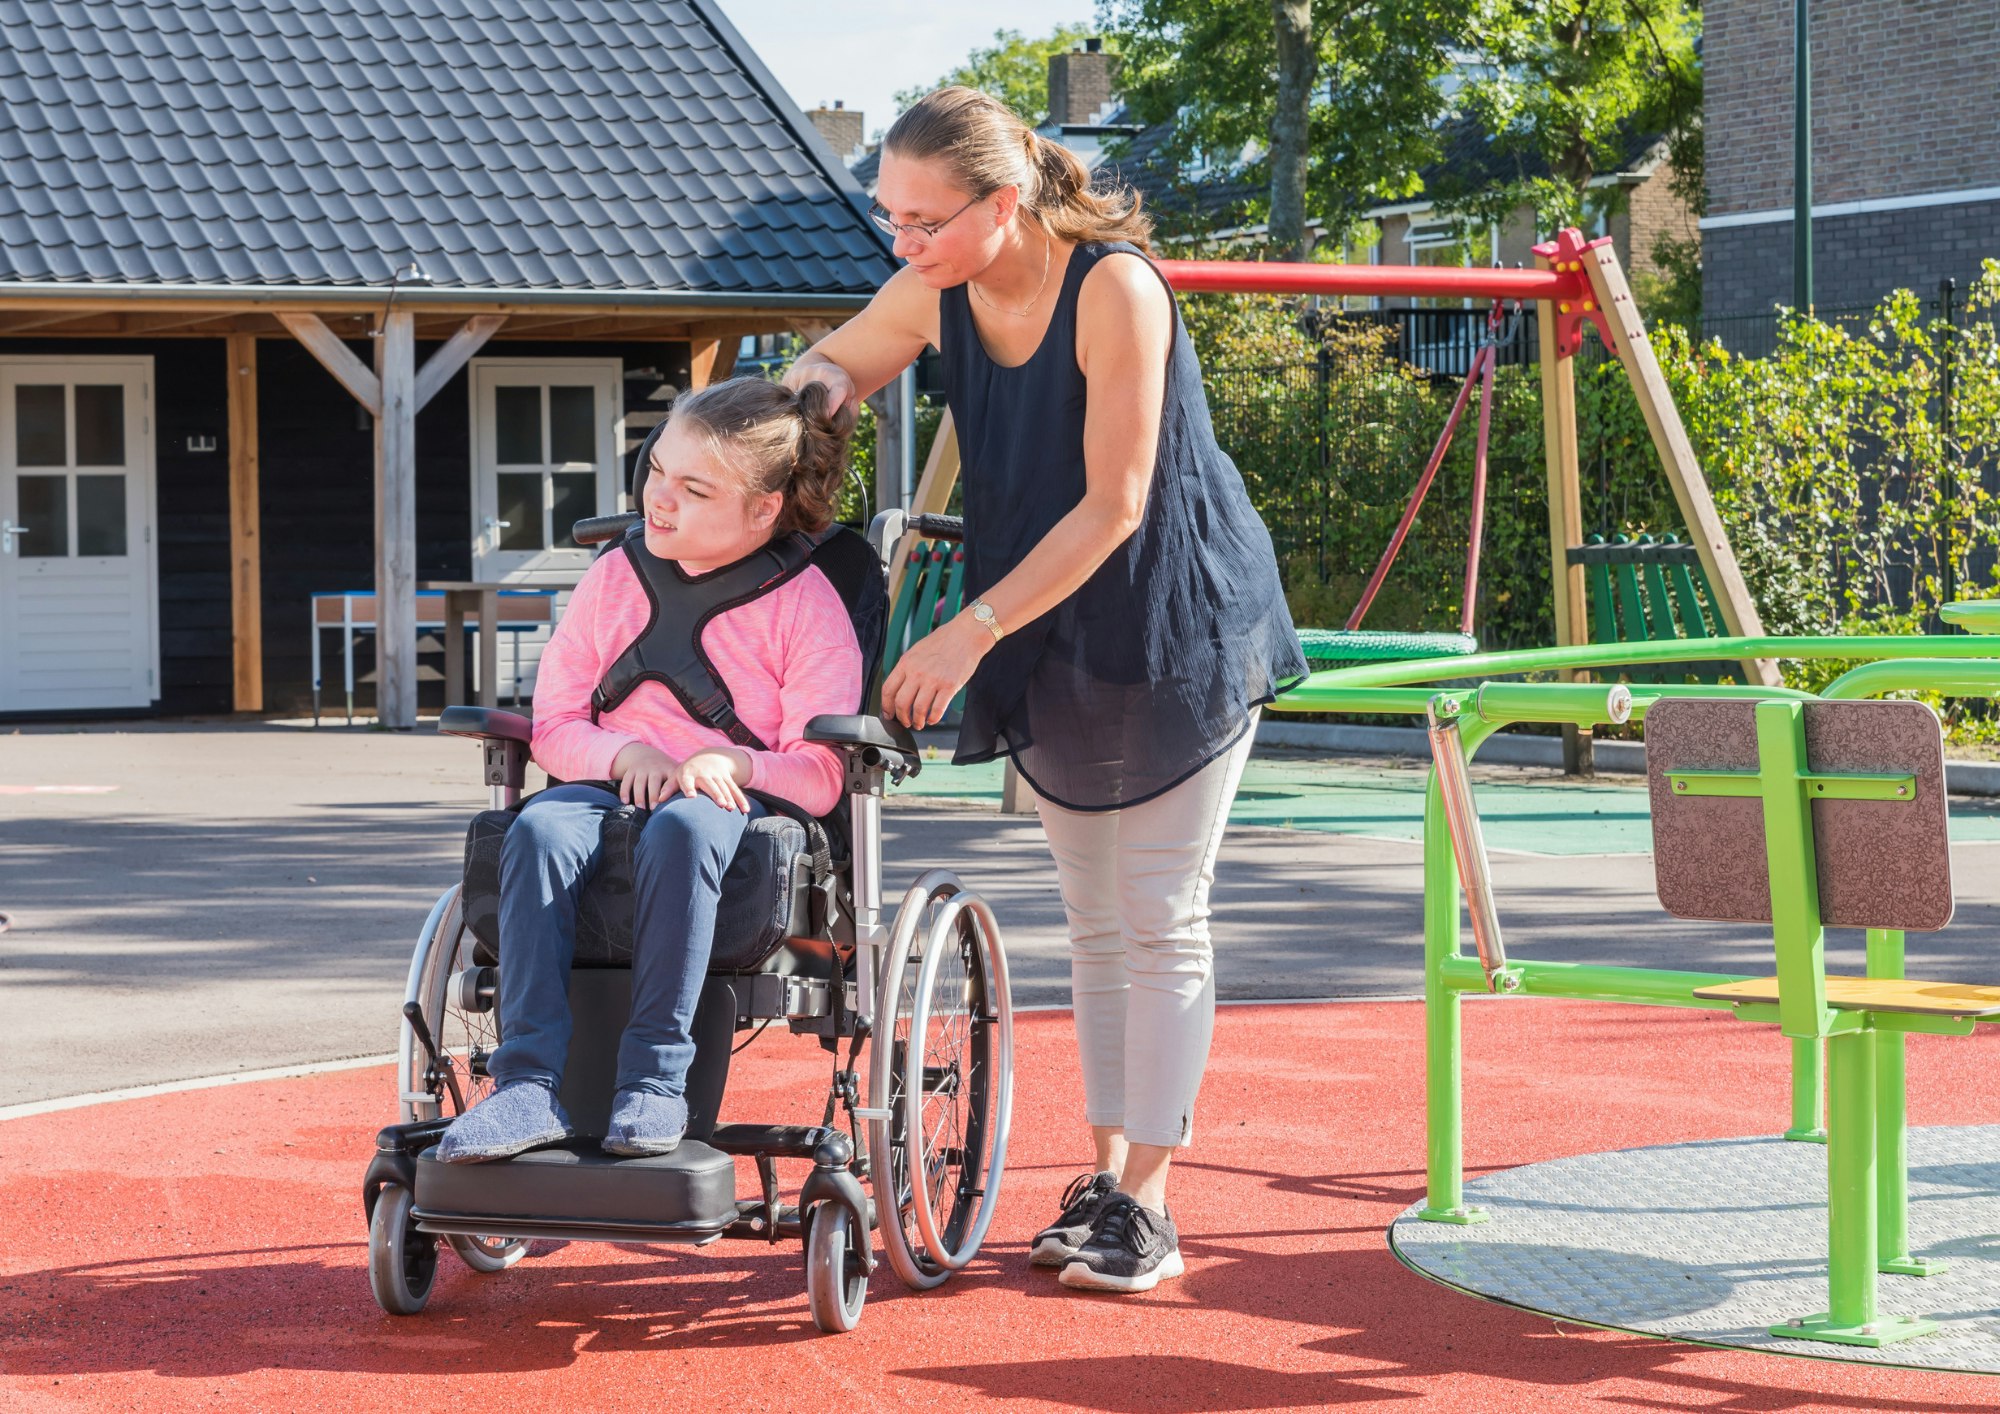 Student in a wheelchair in the playground accompanied by a teacher or carer